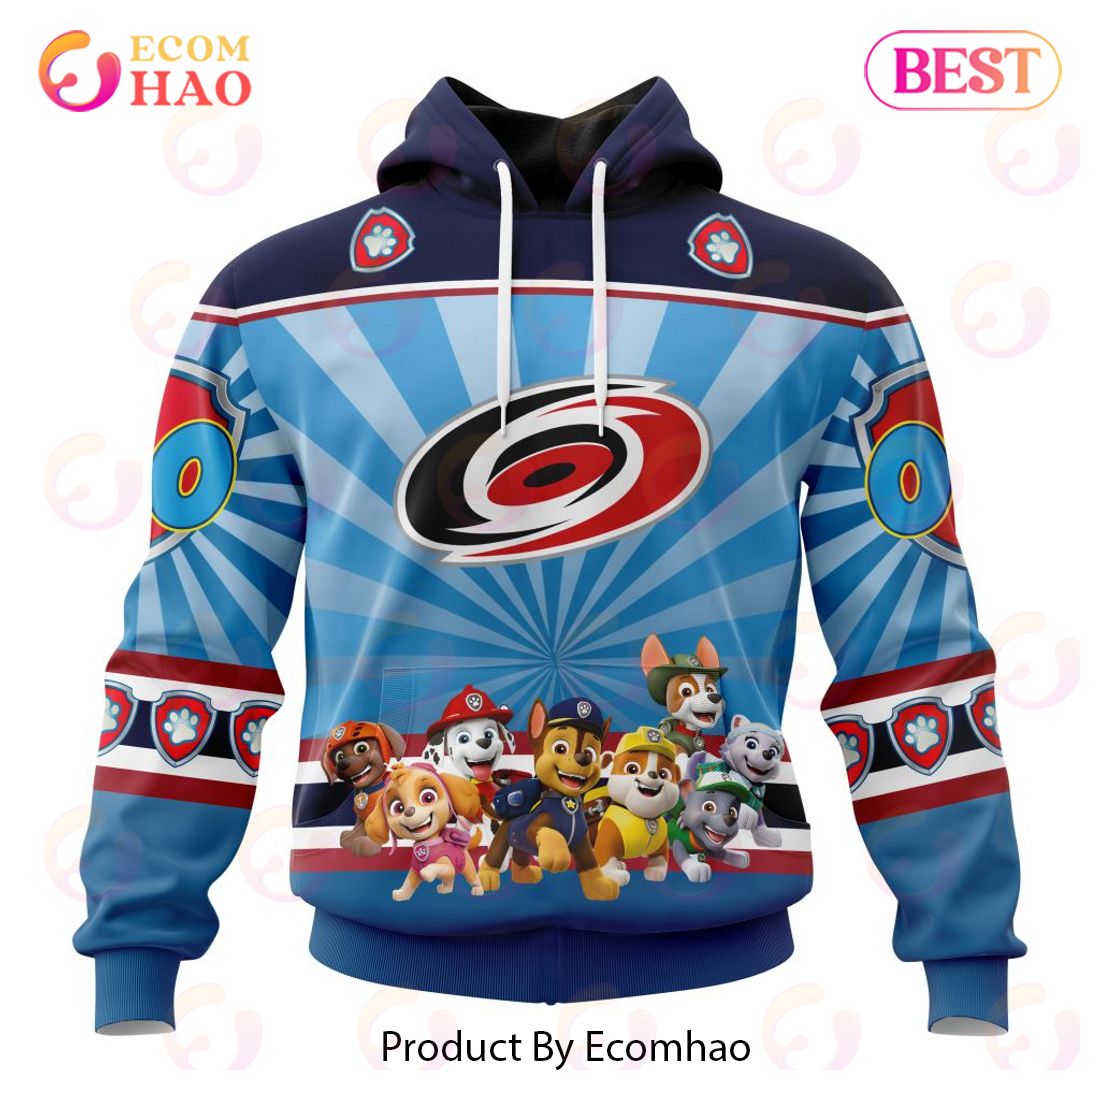 Carolina Hurricanes Hoodie 3D Iron Maiden Carolina Hurricanes Gift -  Personalized Gifts: Family, Sports, Occasions, Trending